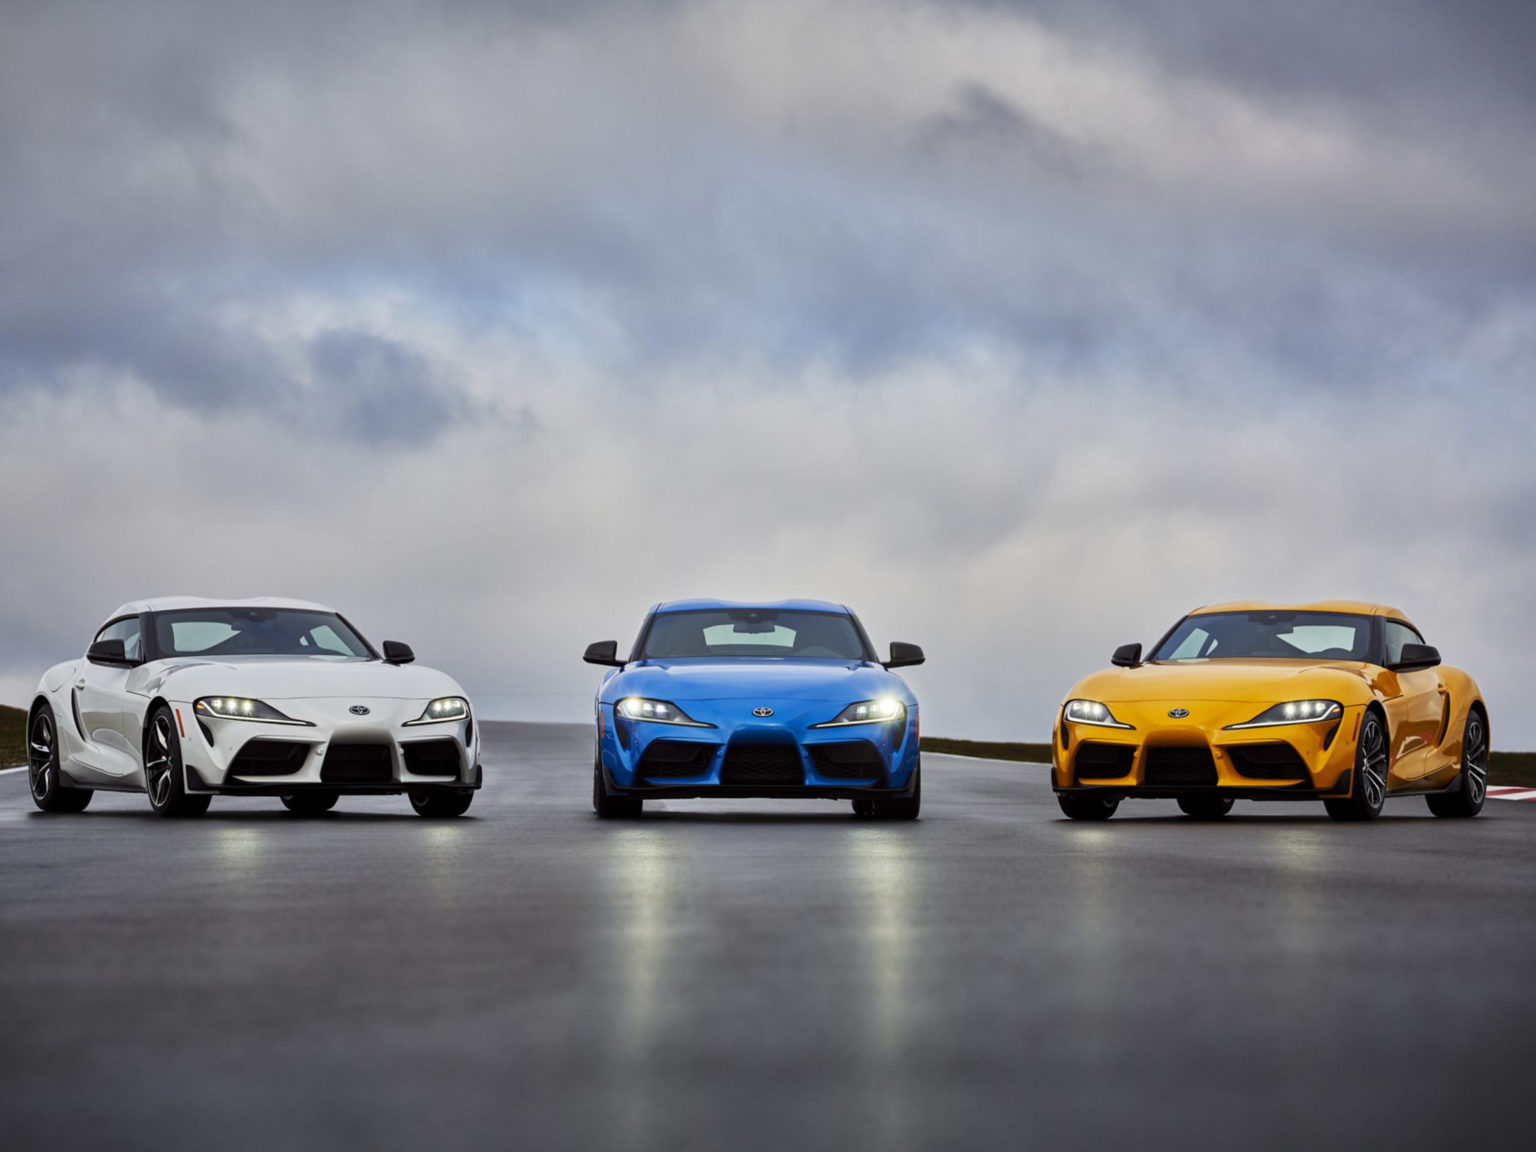 The Toyota Supra has two new iterations for the 2021 model year.